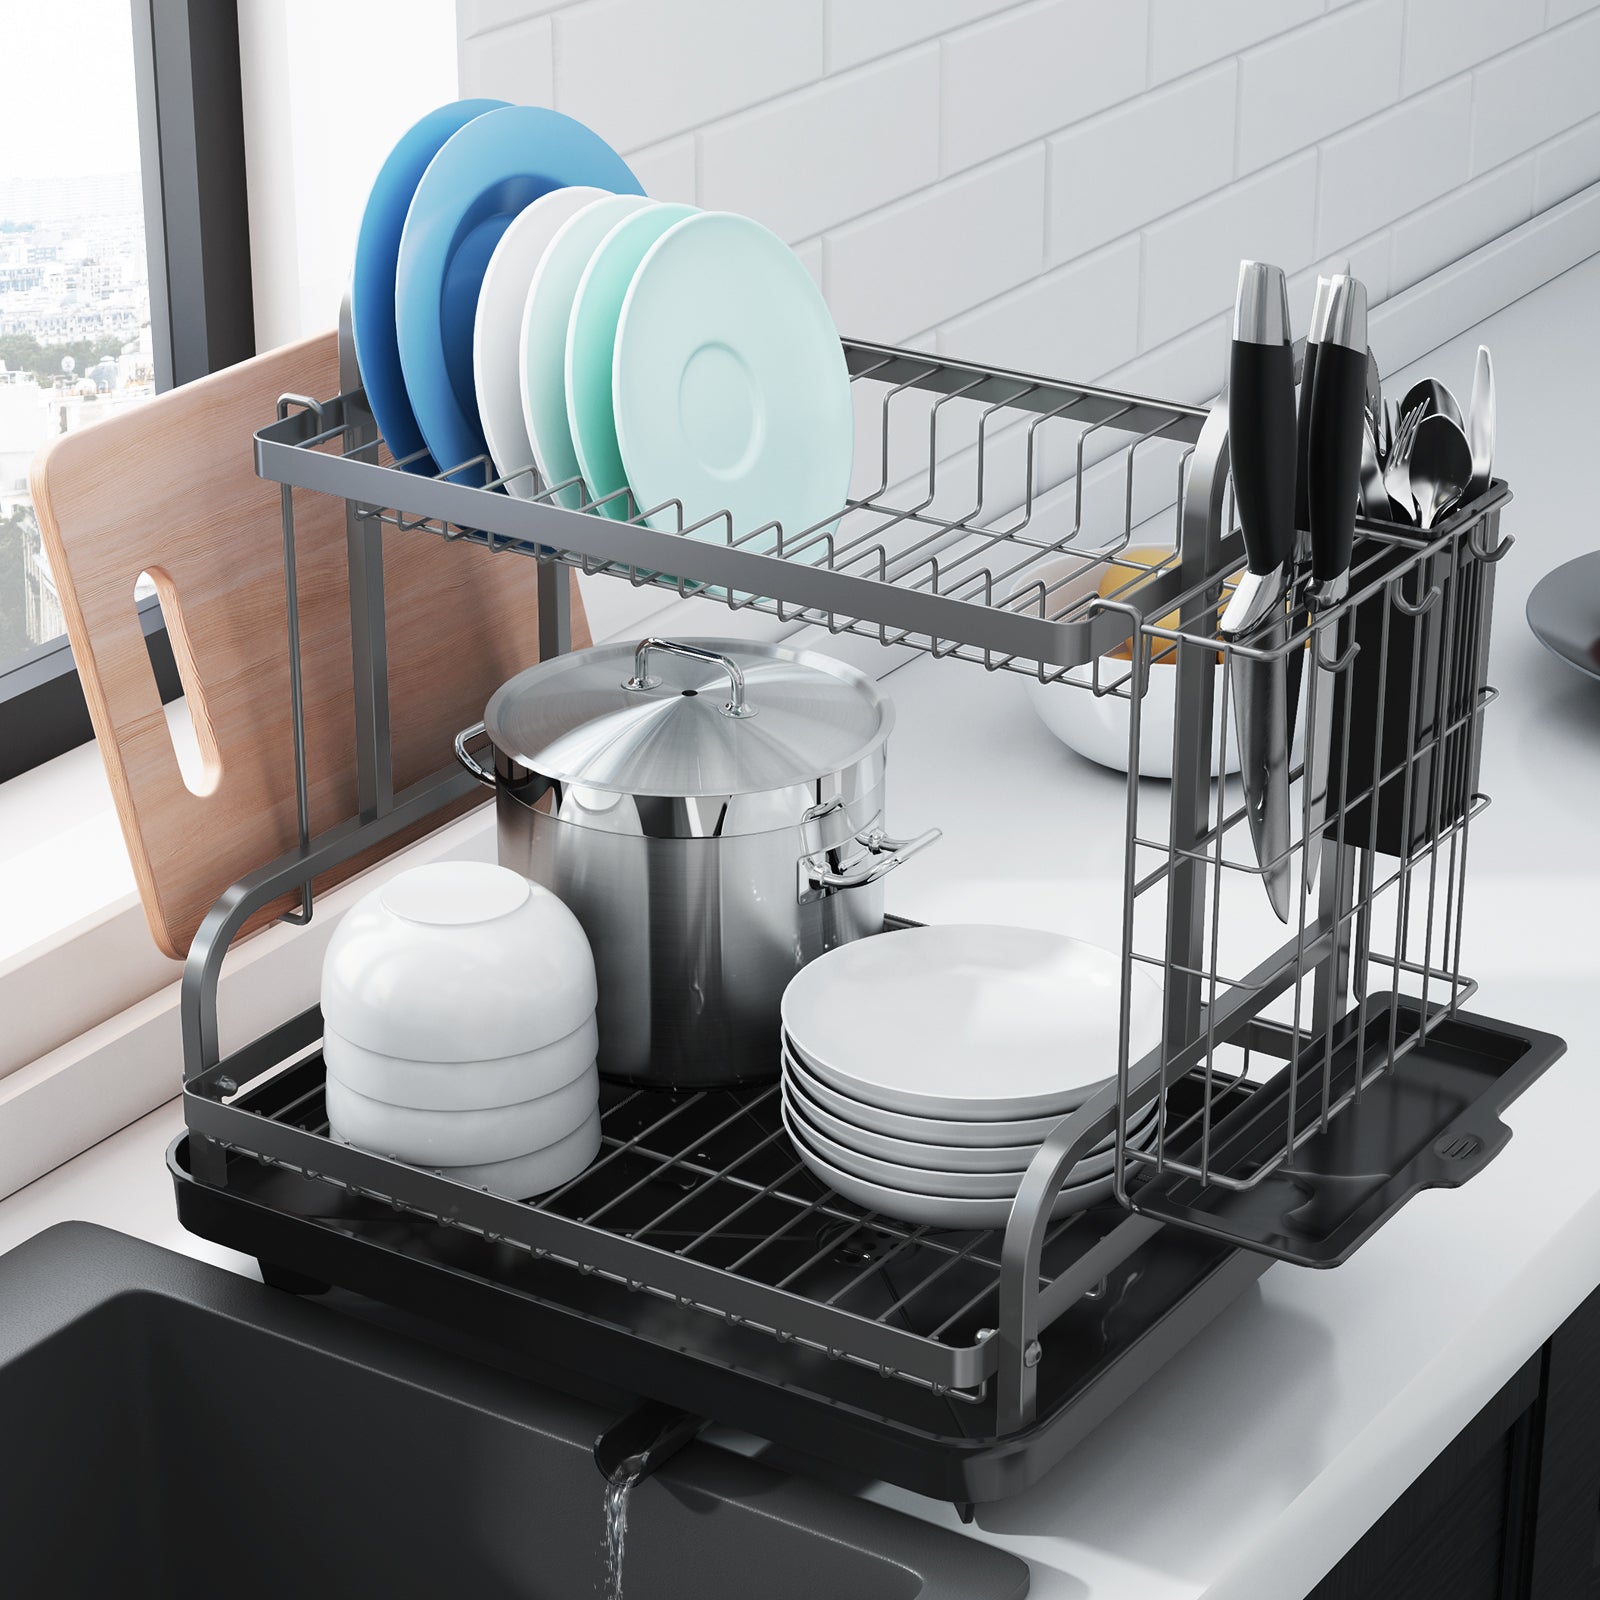 Kitsure Dish Drying Rack, Dish Rack with Drainboard Set for Dish Sets &Dish  Rack for Counter, Multifunctional Dish Strainer for Kitchen Counter with  Drainage,Extendable Tray, Cup Holder & Cutlery Box 